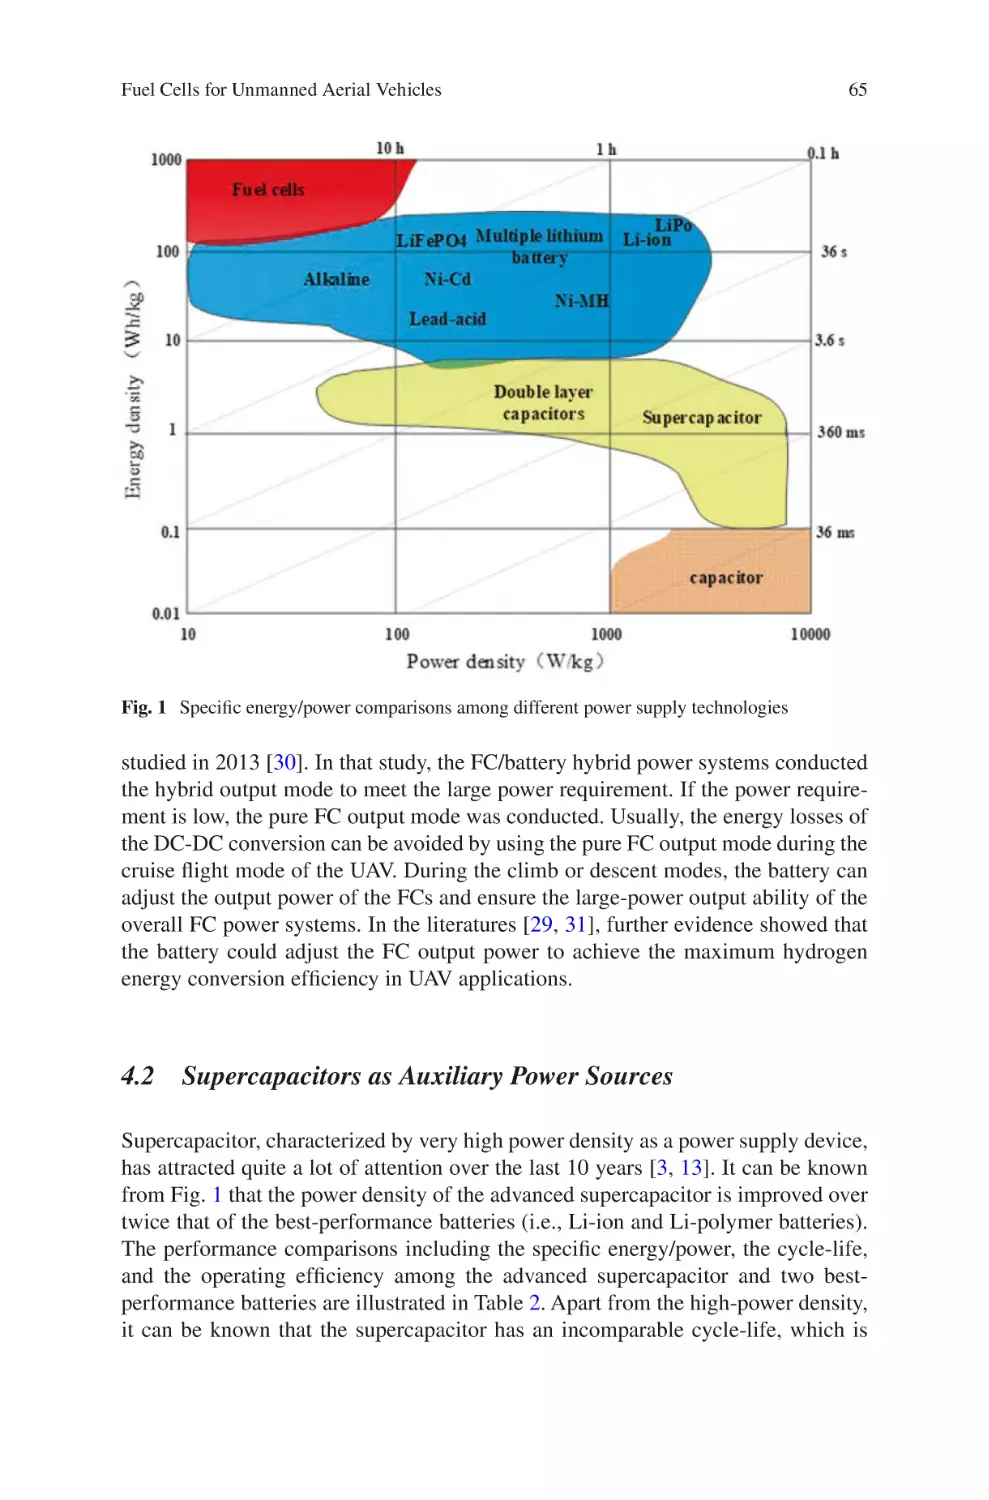 4.2 Supercapacitors as Auxiliary Power Sources